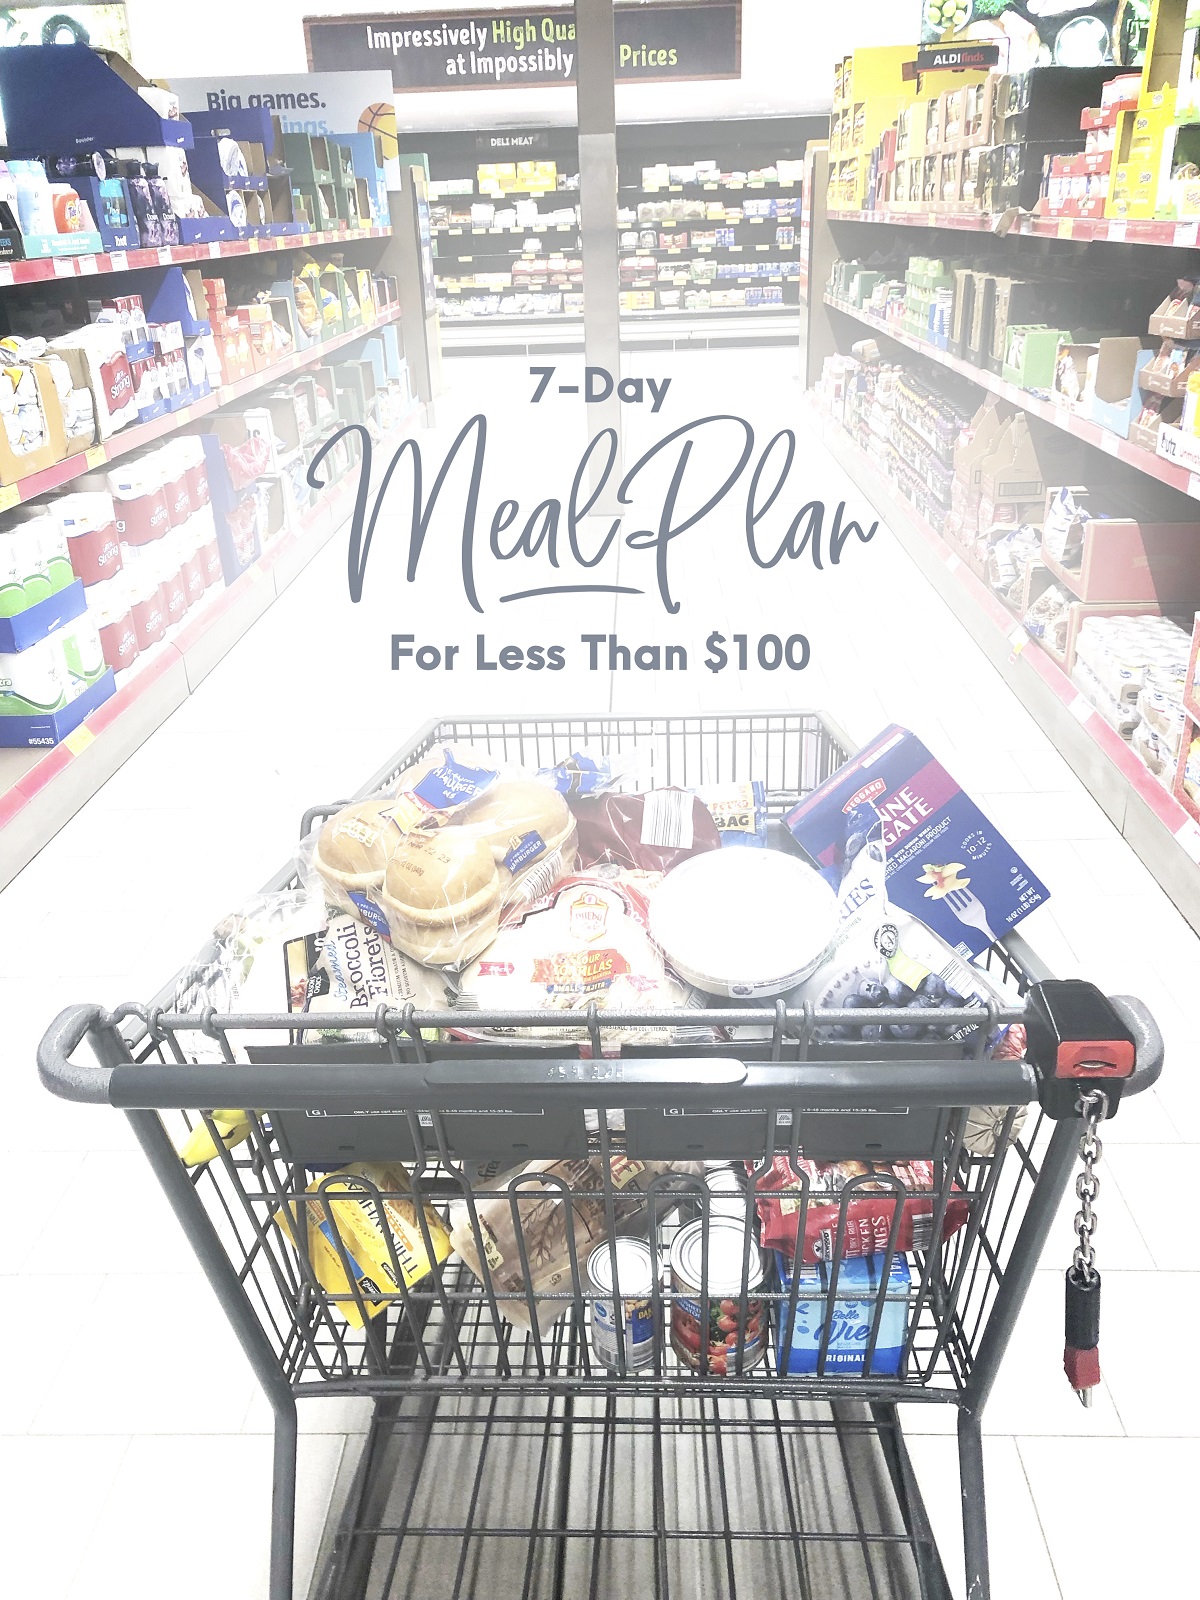 A 7-day meal plan for less than $100: Get the meal plan and recipe to feed a family of 4.